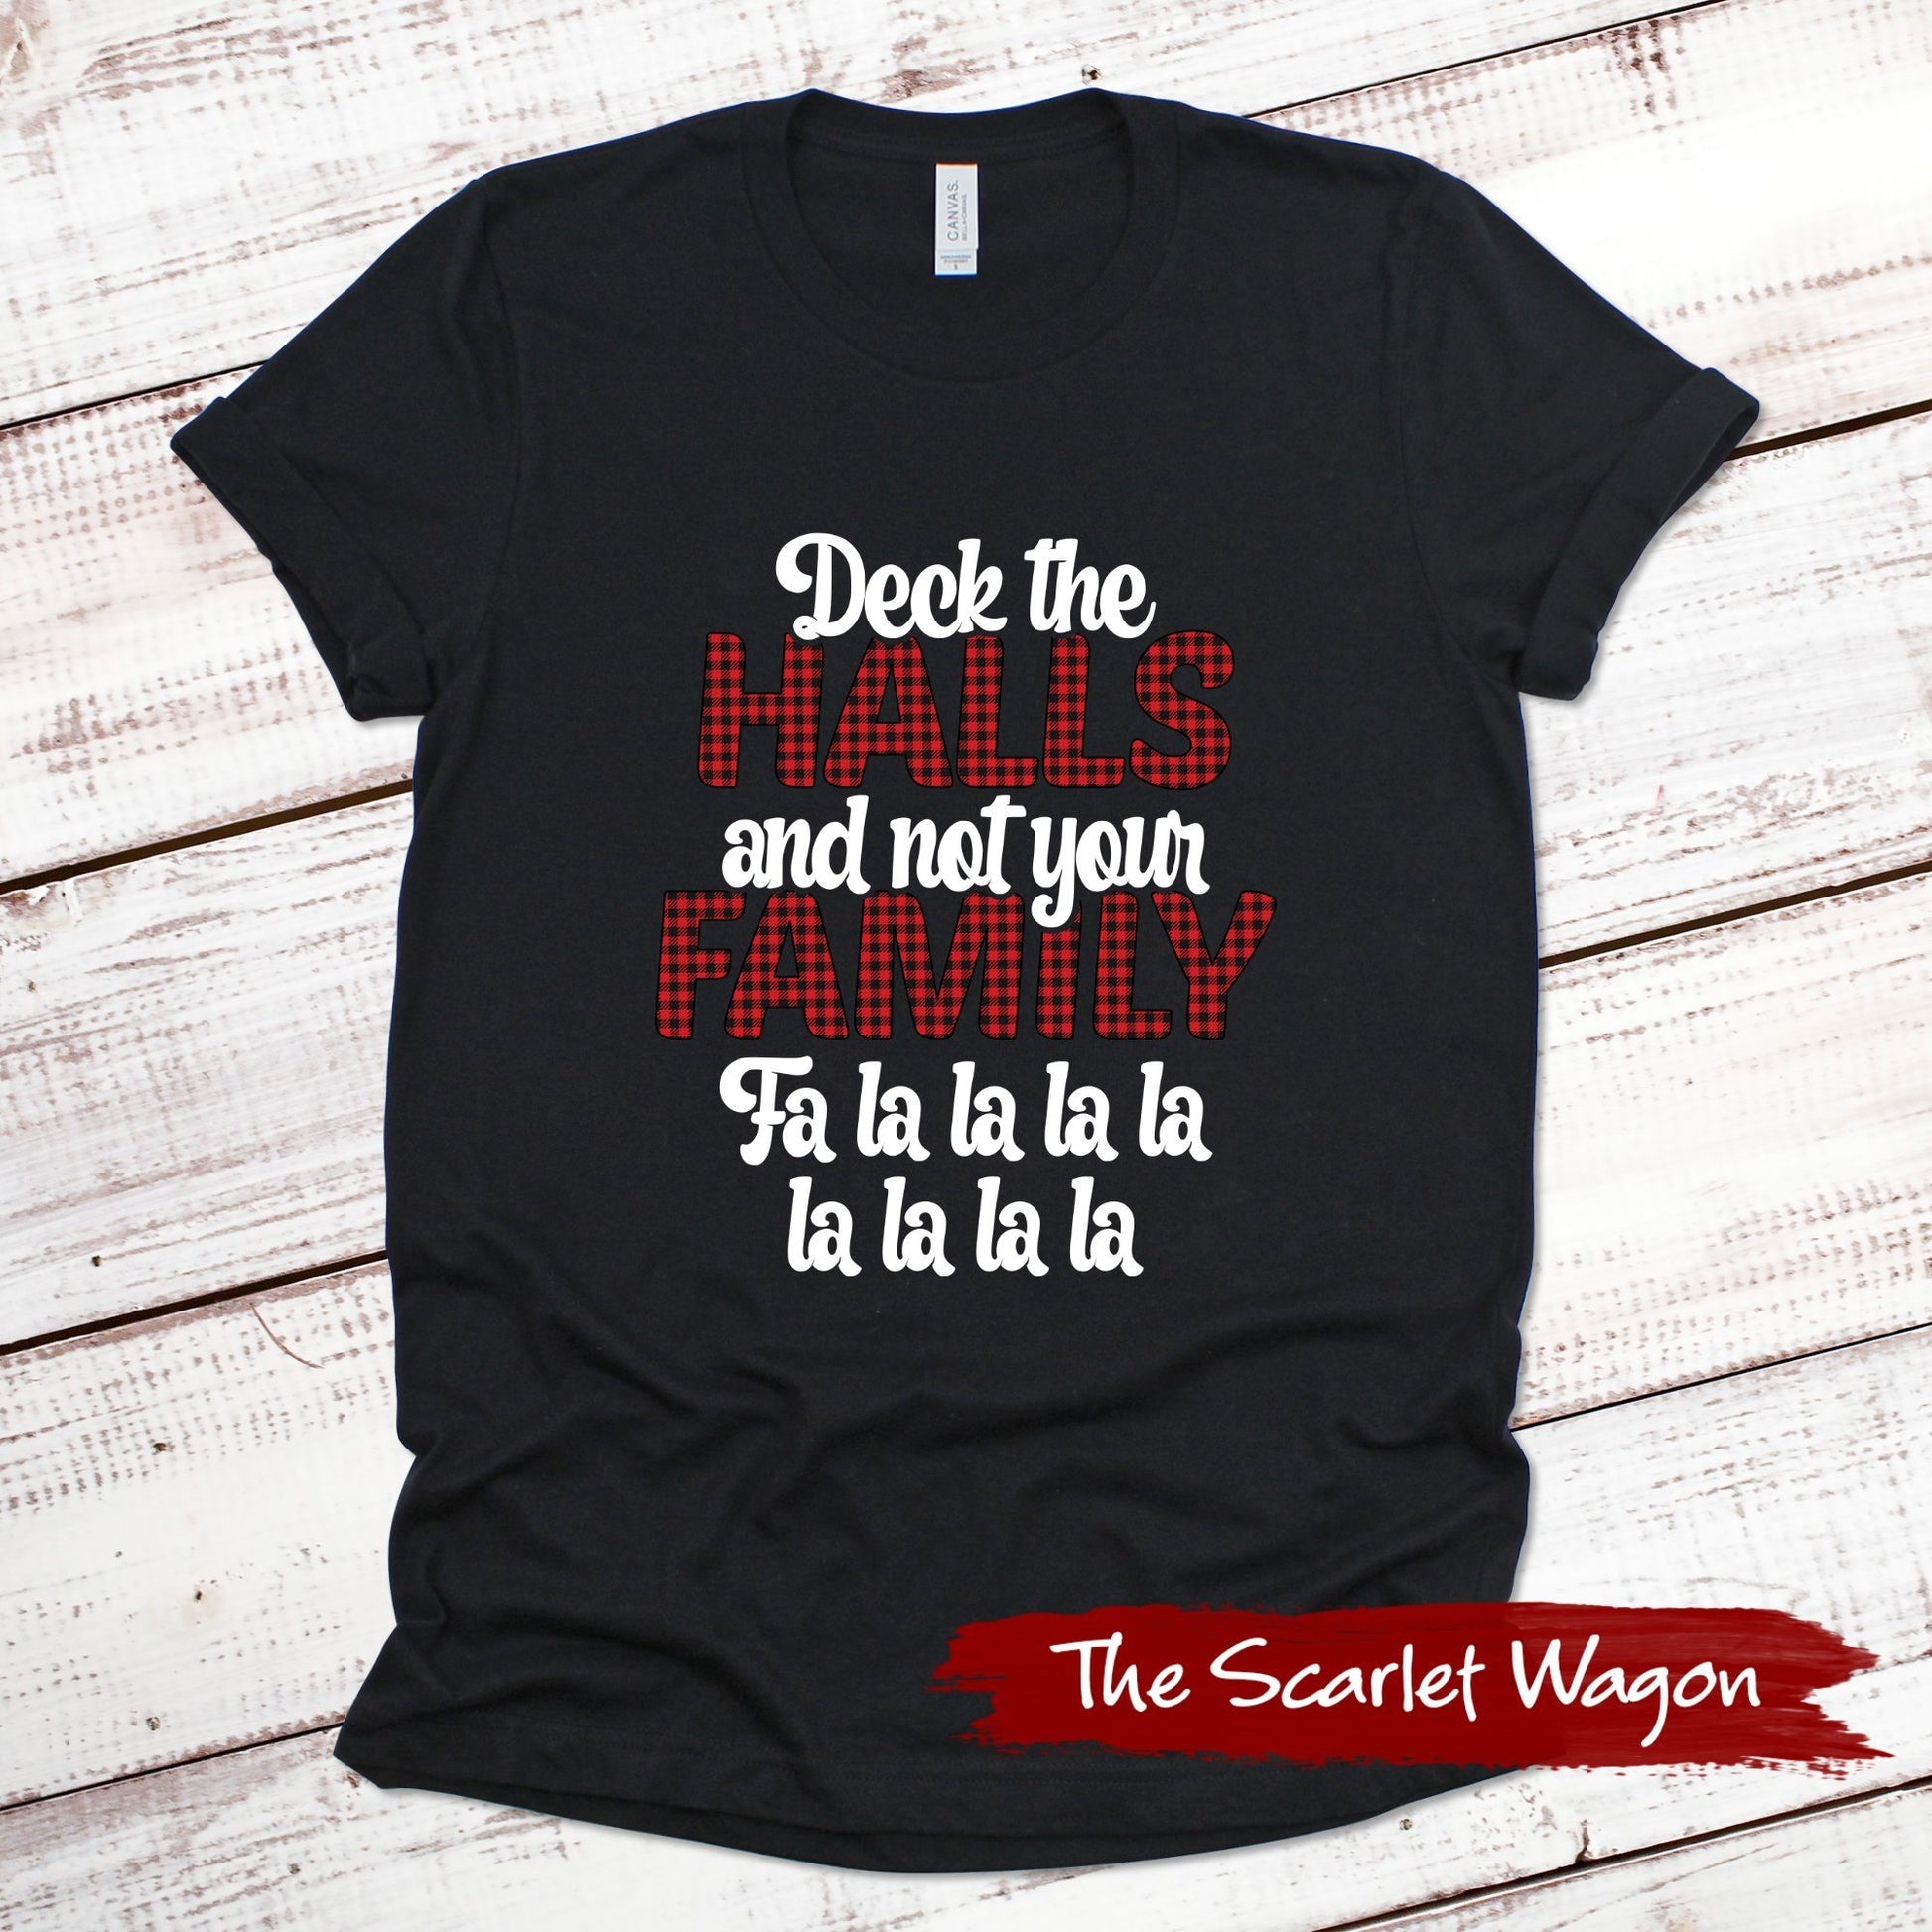 Deck the Halls and Not Your Family Christmas Shirt Scarlet Wagon Black XS 